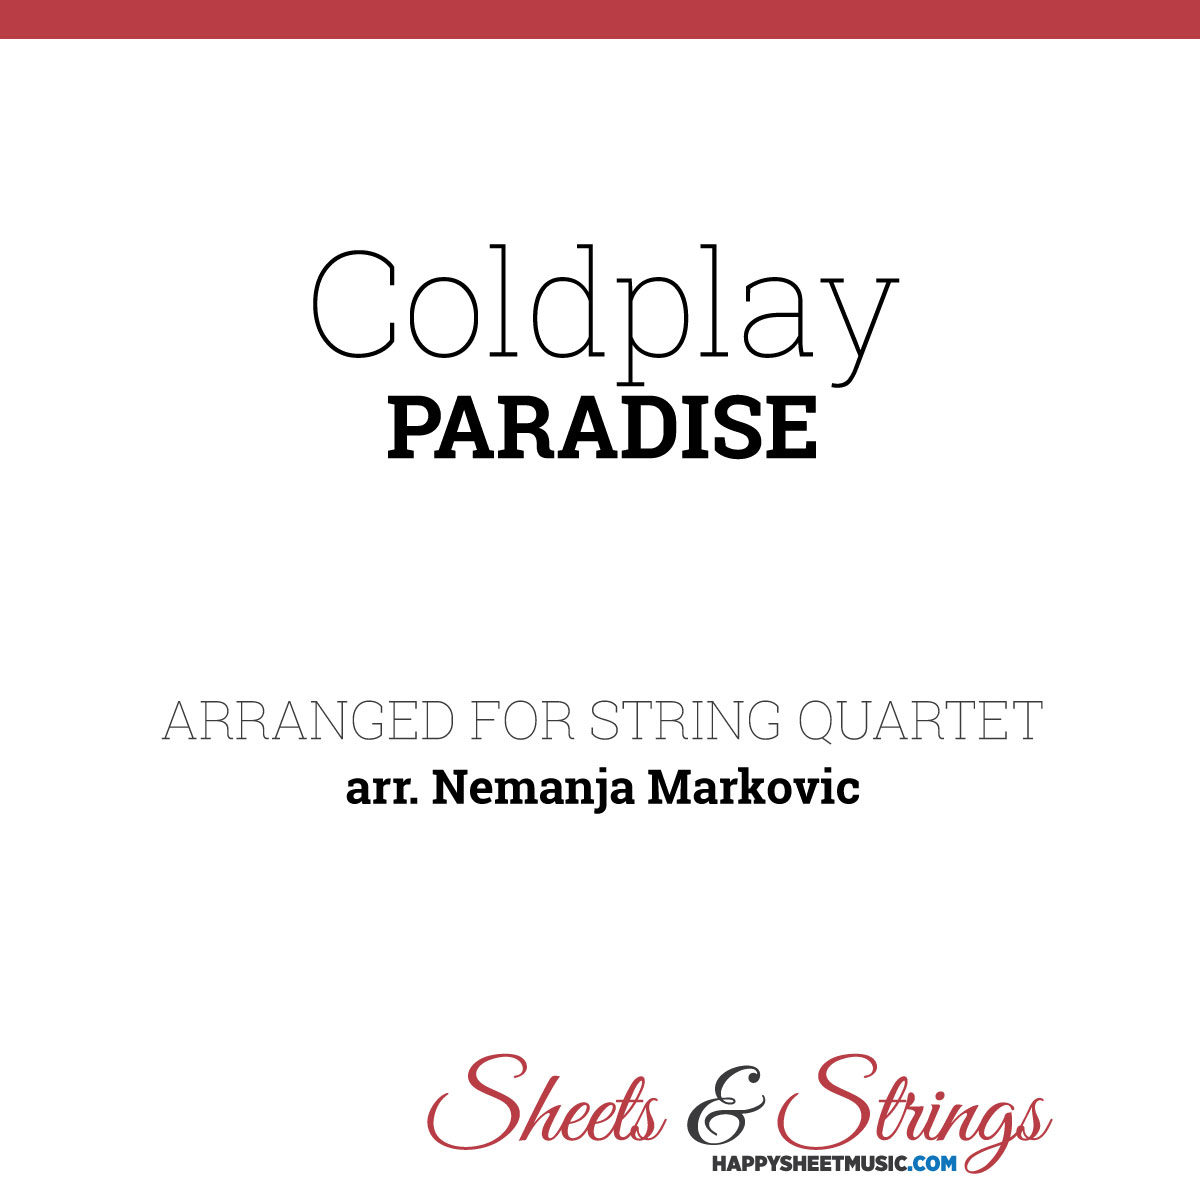 Coldplay - Paradise - Sheet Music for String Quartet - Music Arrangement for String Quartet